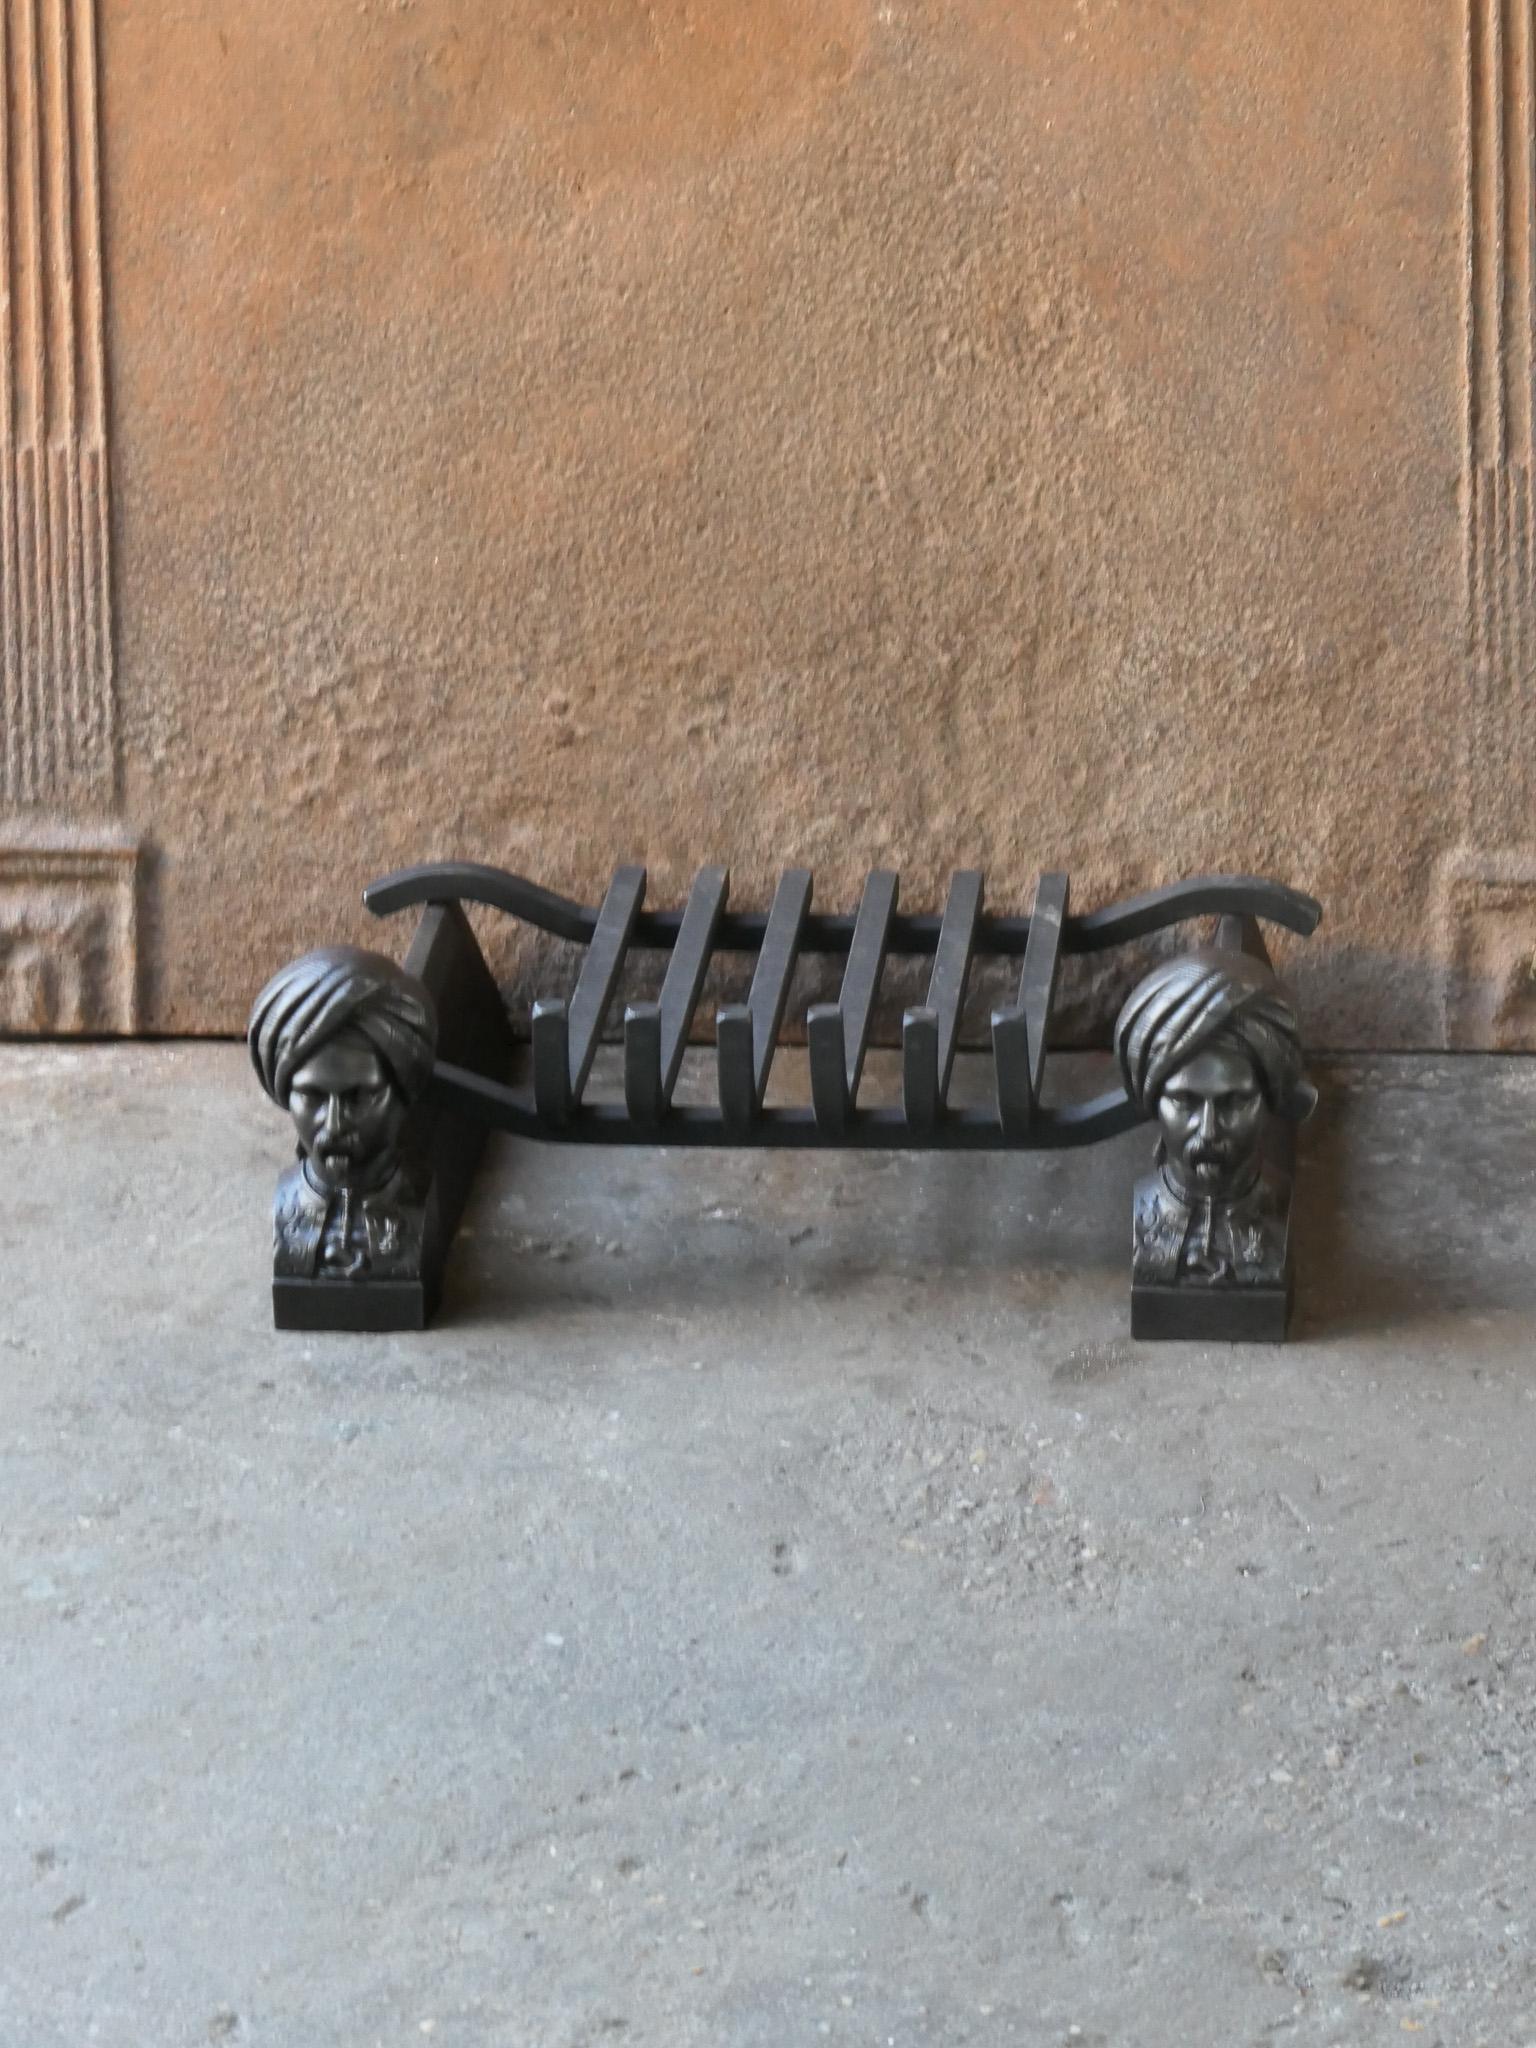 19th century French Napoleon III fireplace grate, made of cast iron and wrought iron. The basket is in a good condition and is fully functional.